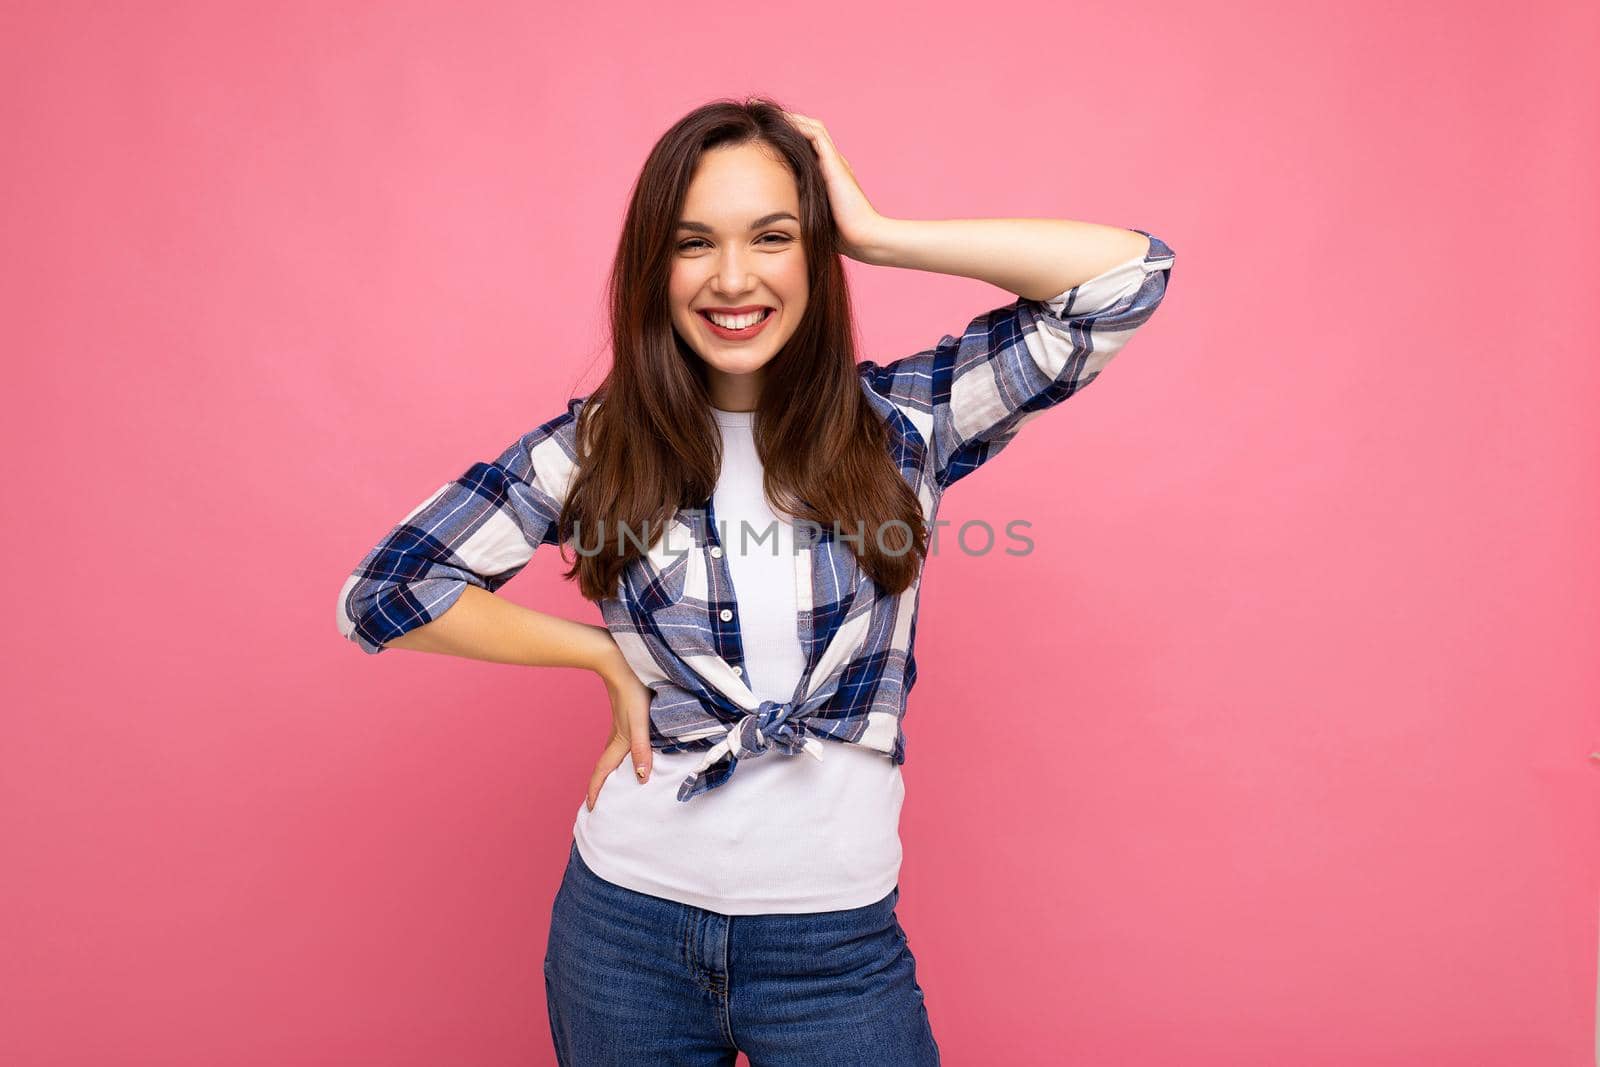 Portrait of positive cheerful fashionable woman in hipster outfit isolated on pink background with copy space by TRMK